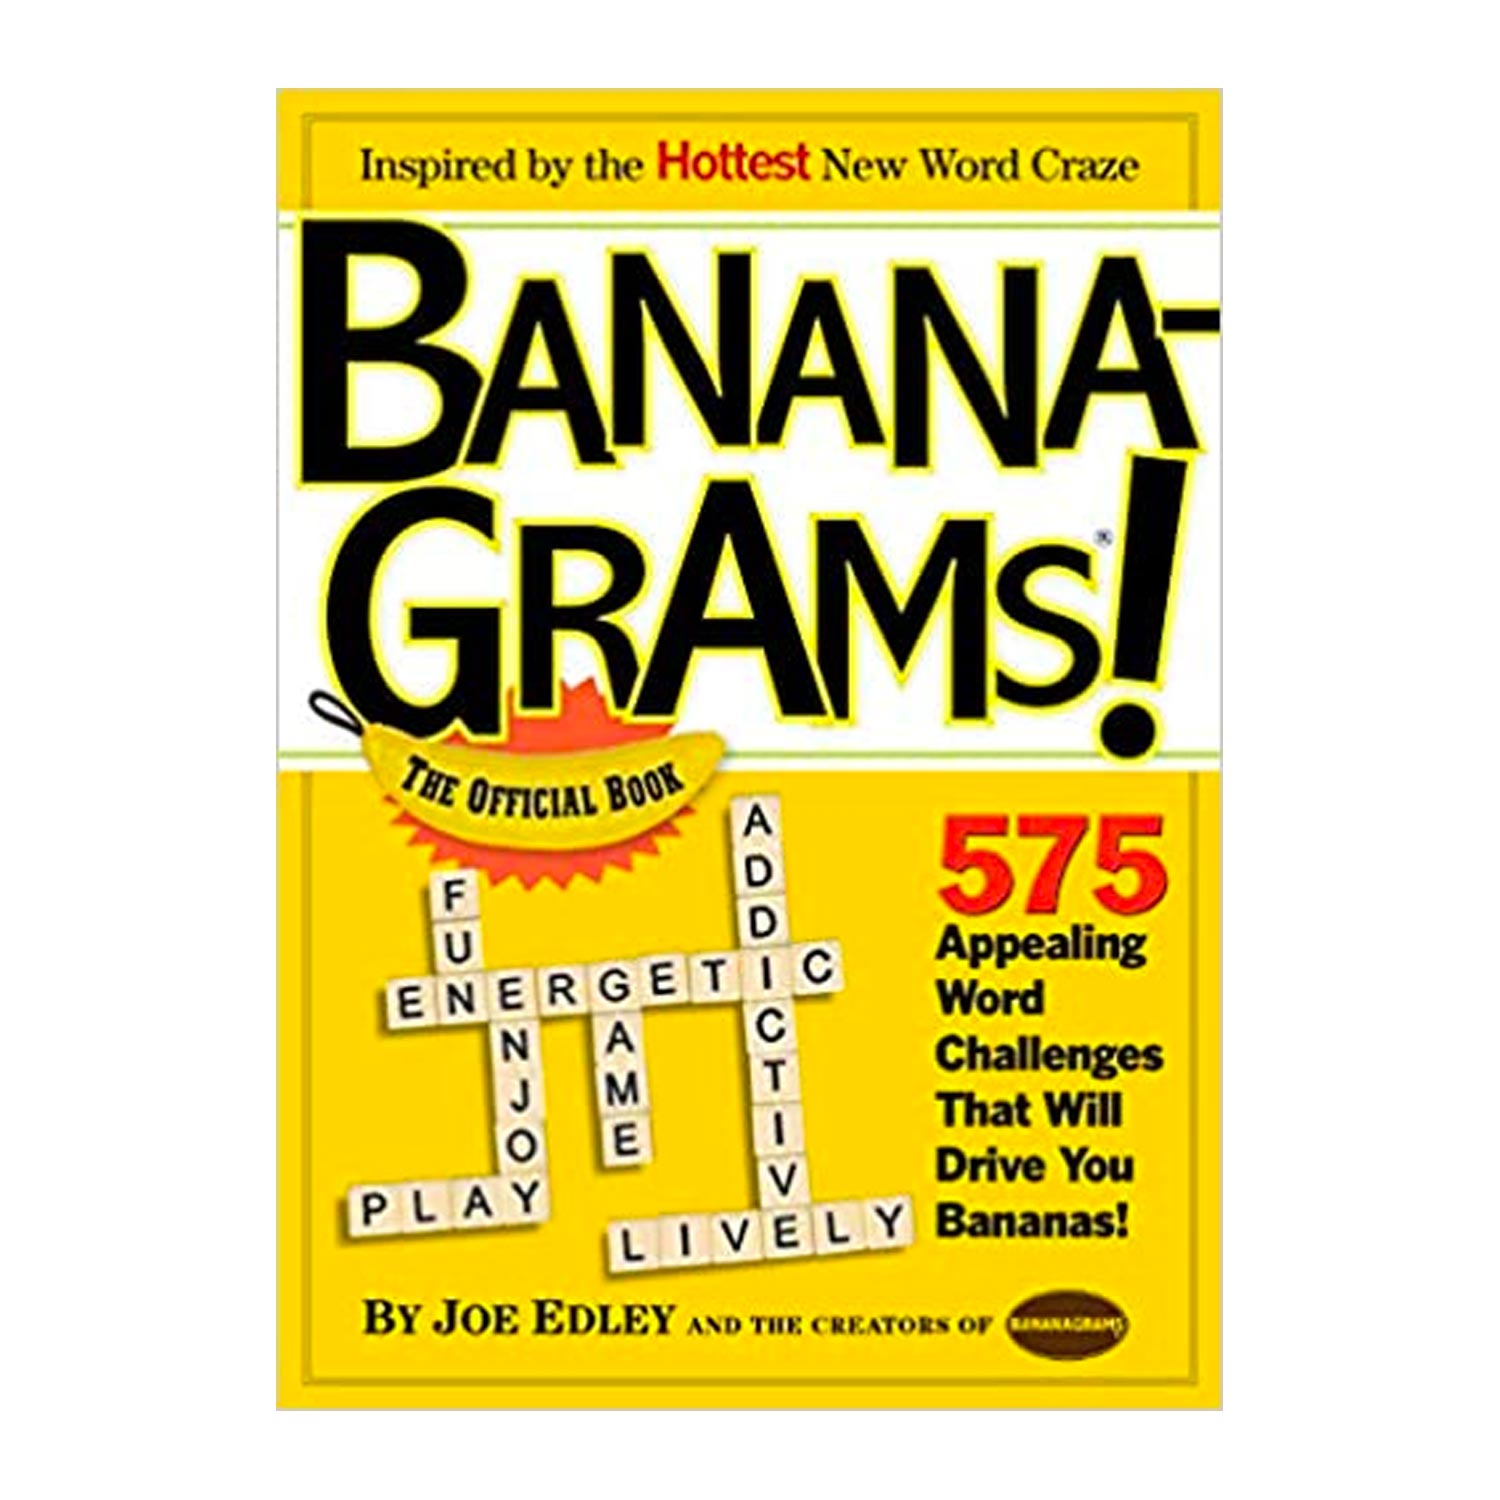 Banana-Grams! The Official Book. 575 Appealing Word Challenges That Will Drive You Bananas!